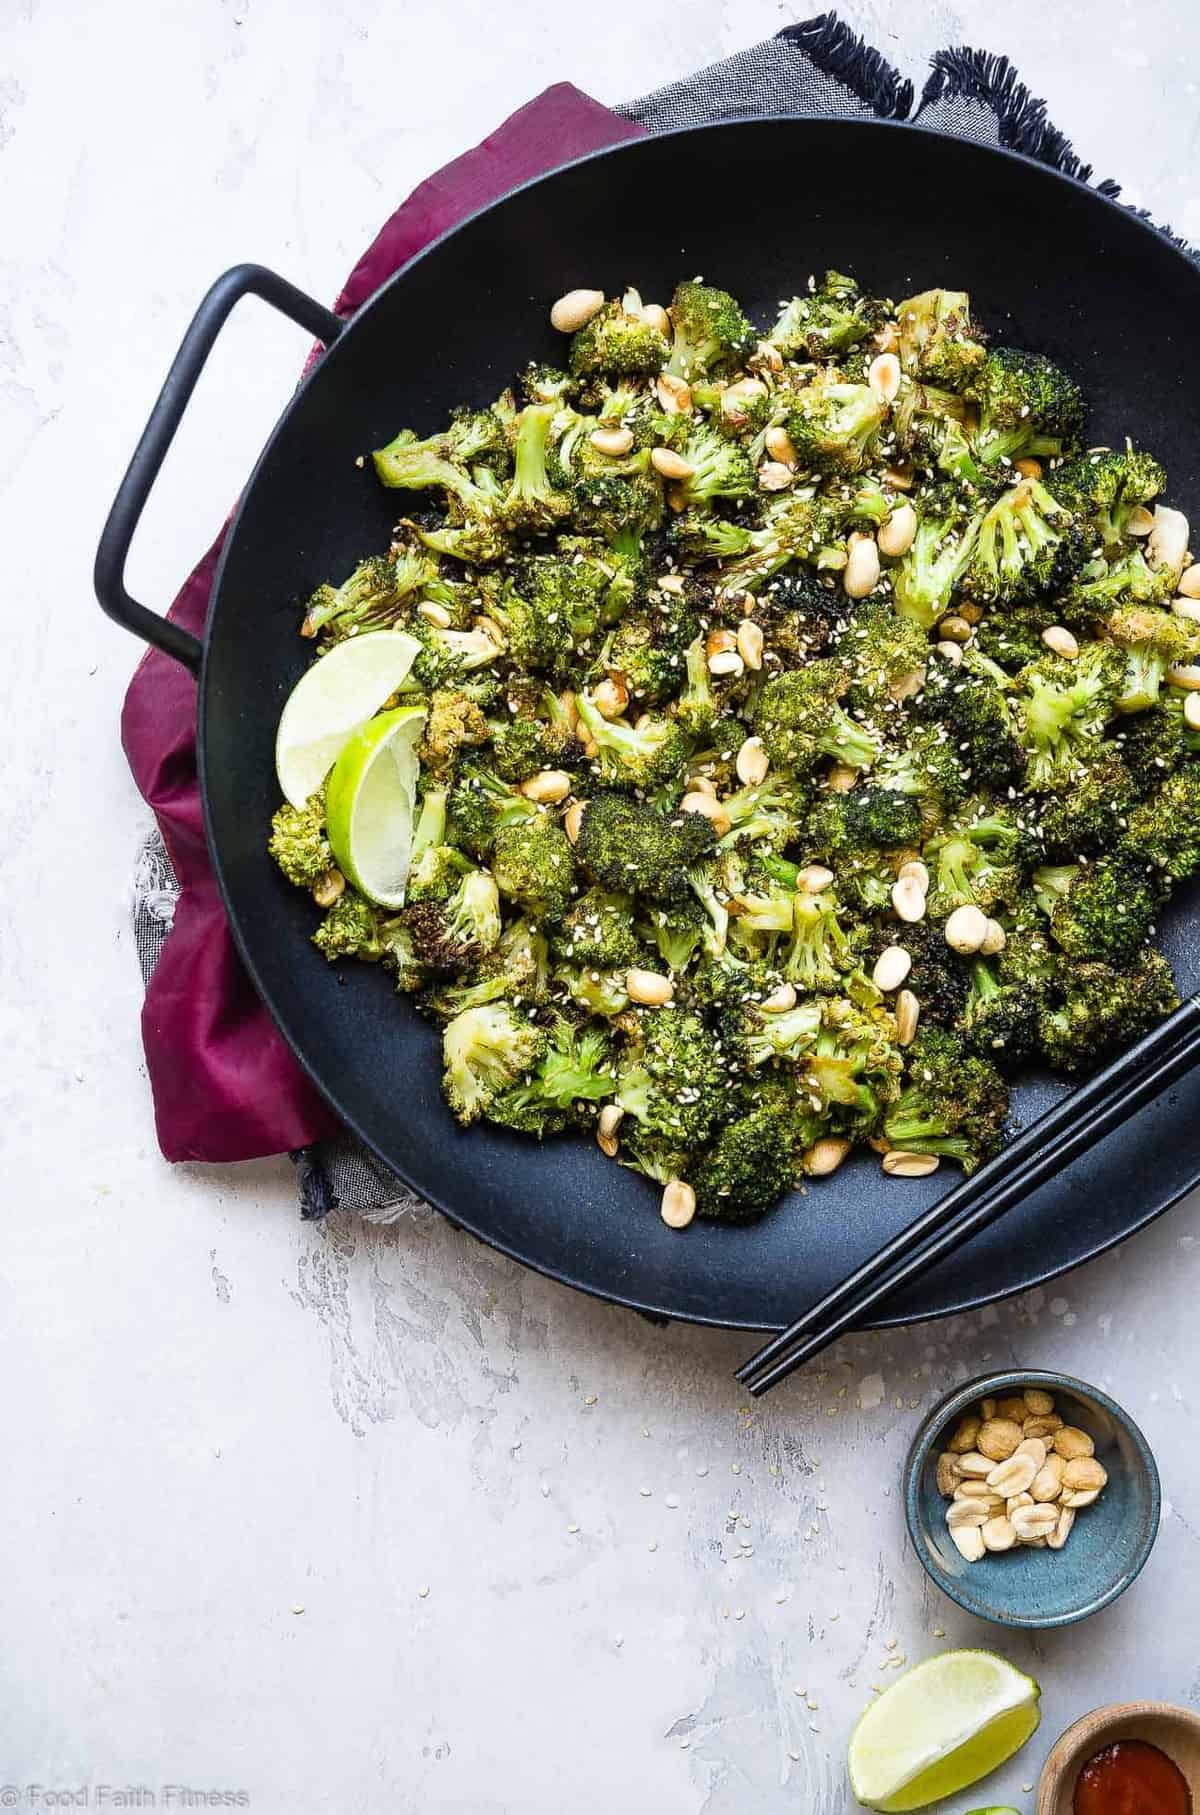 Air Fryer Fried Asian Broccoli - This healthy, gluten-free, low-carb Asian broccoli has a flavorful Asian dressing that will add a kick to your next meal! Sure your family will LOVE vegetables and an oven roasted option is included! | #Foodfaithfitness | #Vegan #Healthy #AirFyer #Gluten-Free #Lowcarb